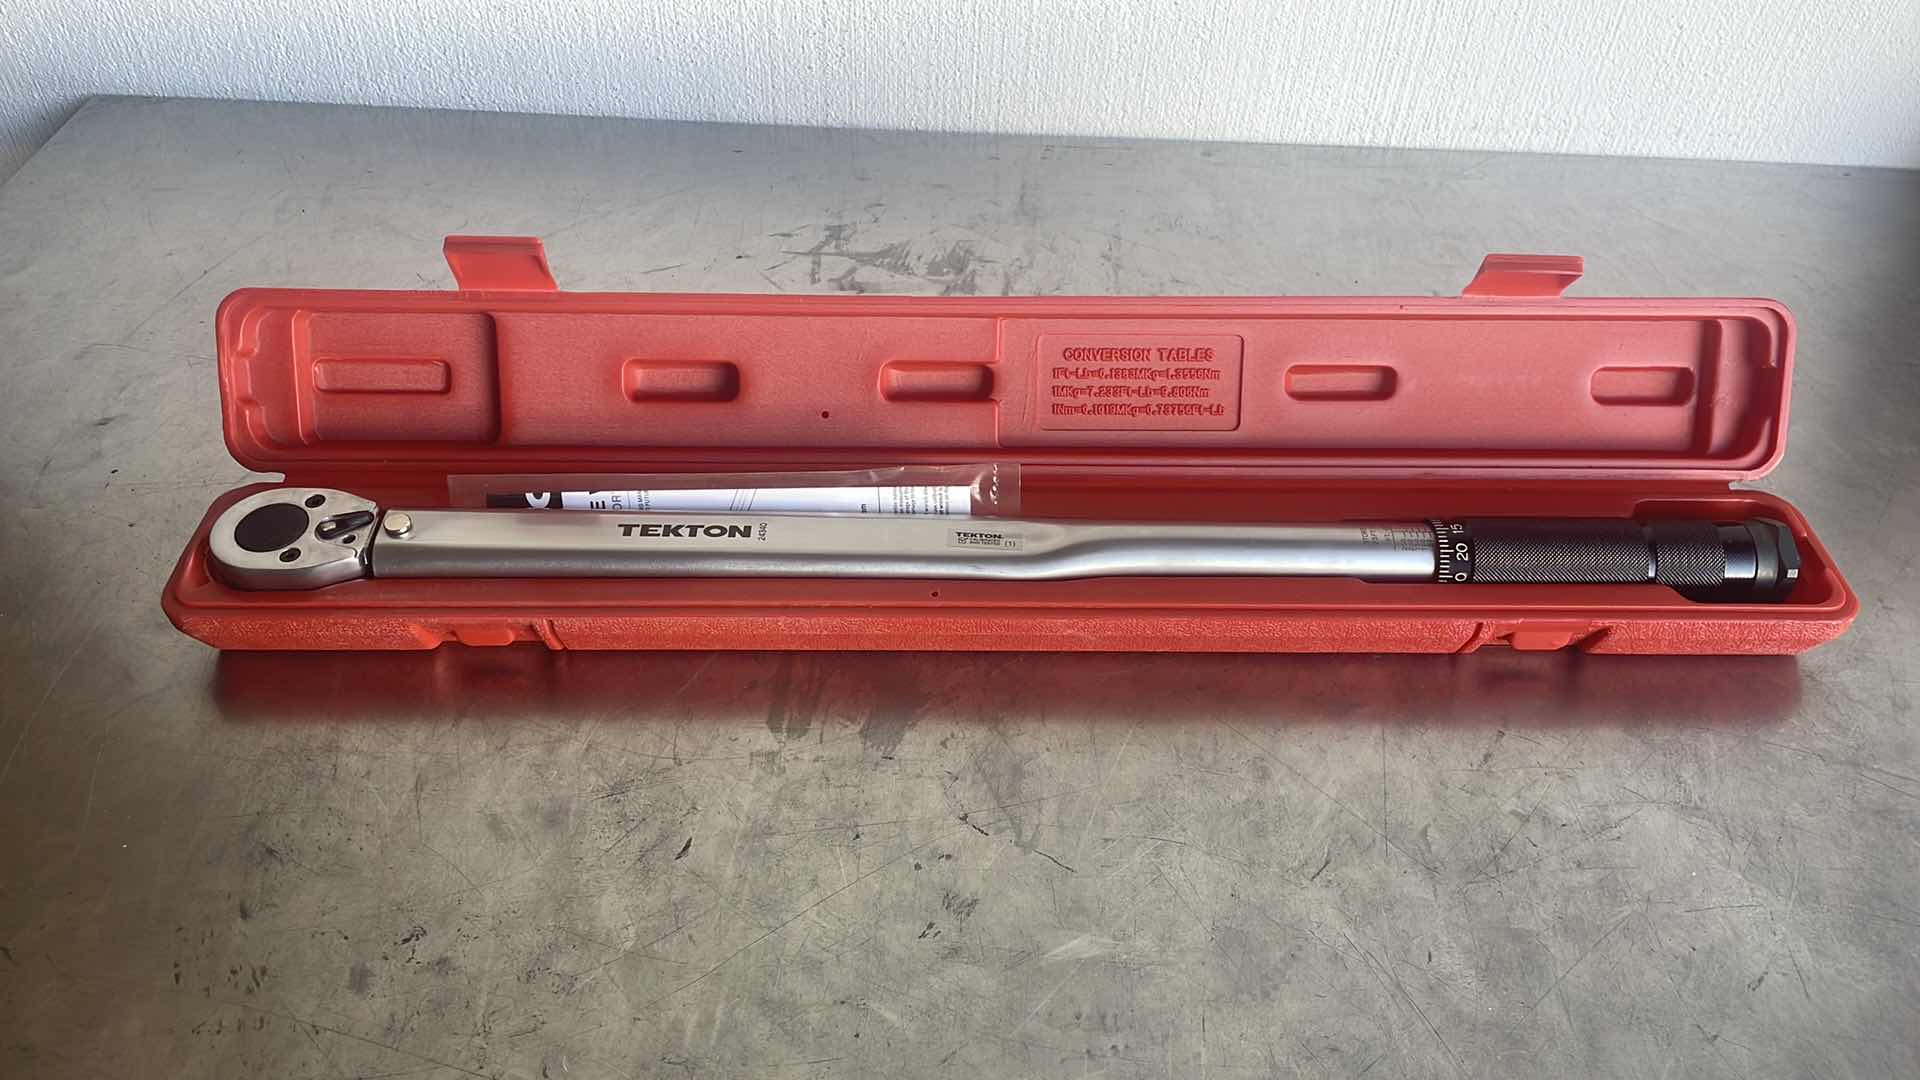 Photo 1 of TEKTON 1/2” DRIVE TORQUE WRENCH 24340 IN CASE